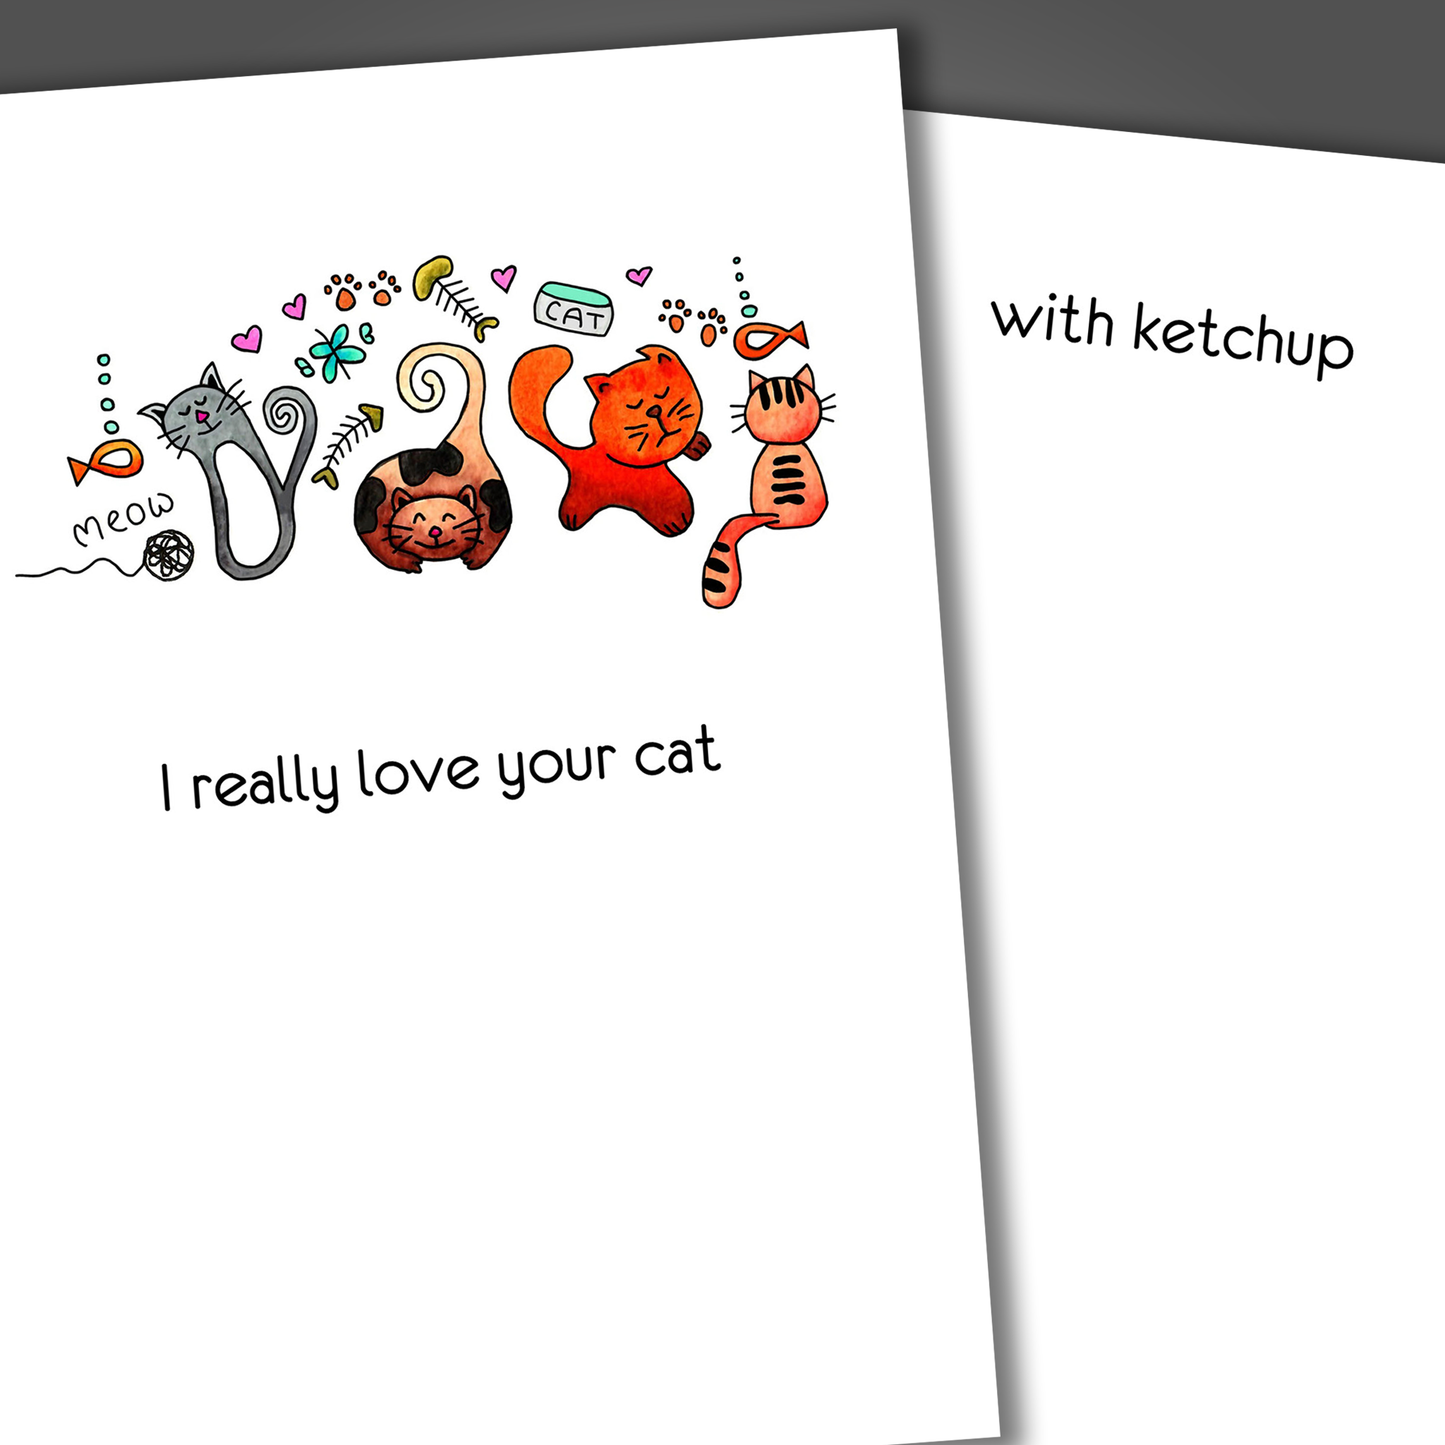 Funny card with cats drawn on the front of the card. Inside the card is a funny joke that says I love your cat...with ketchup